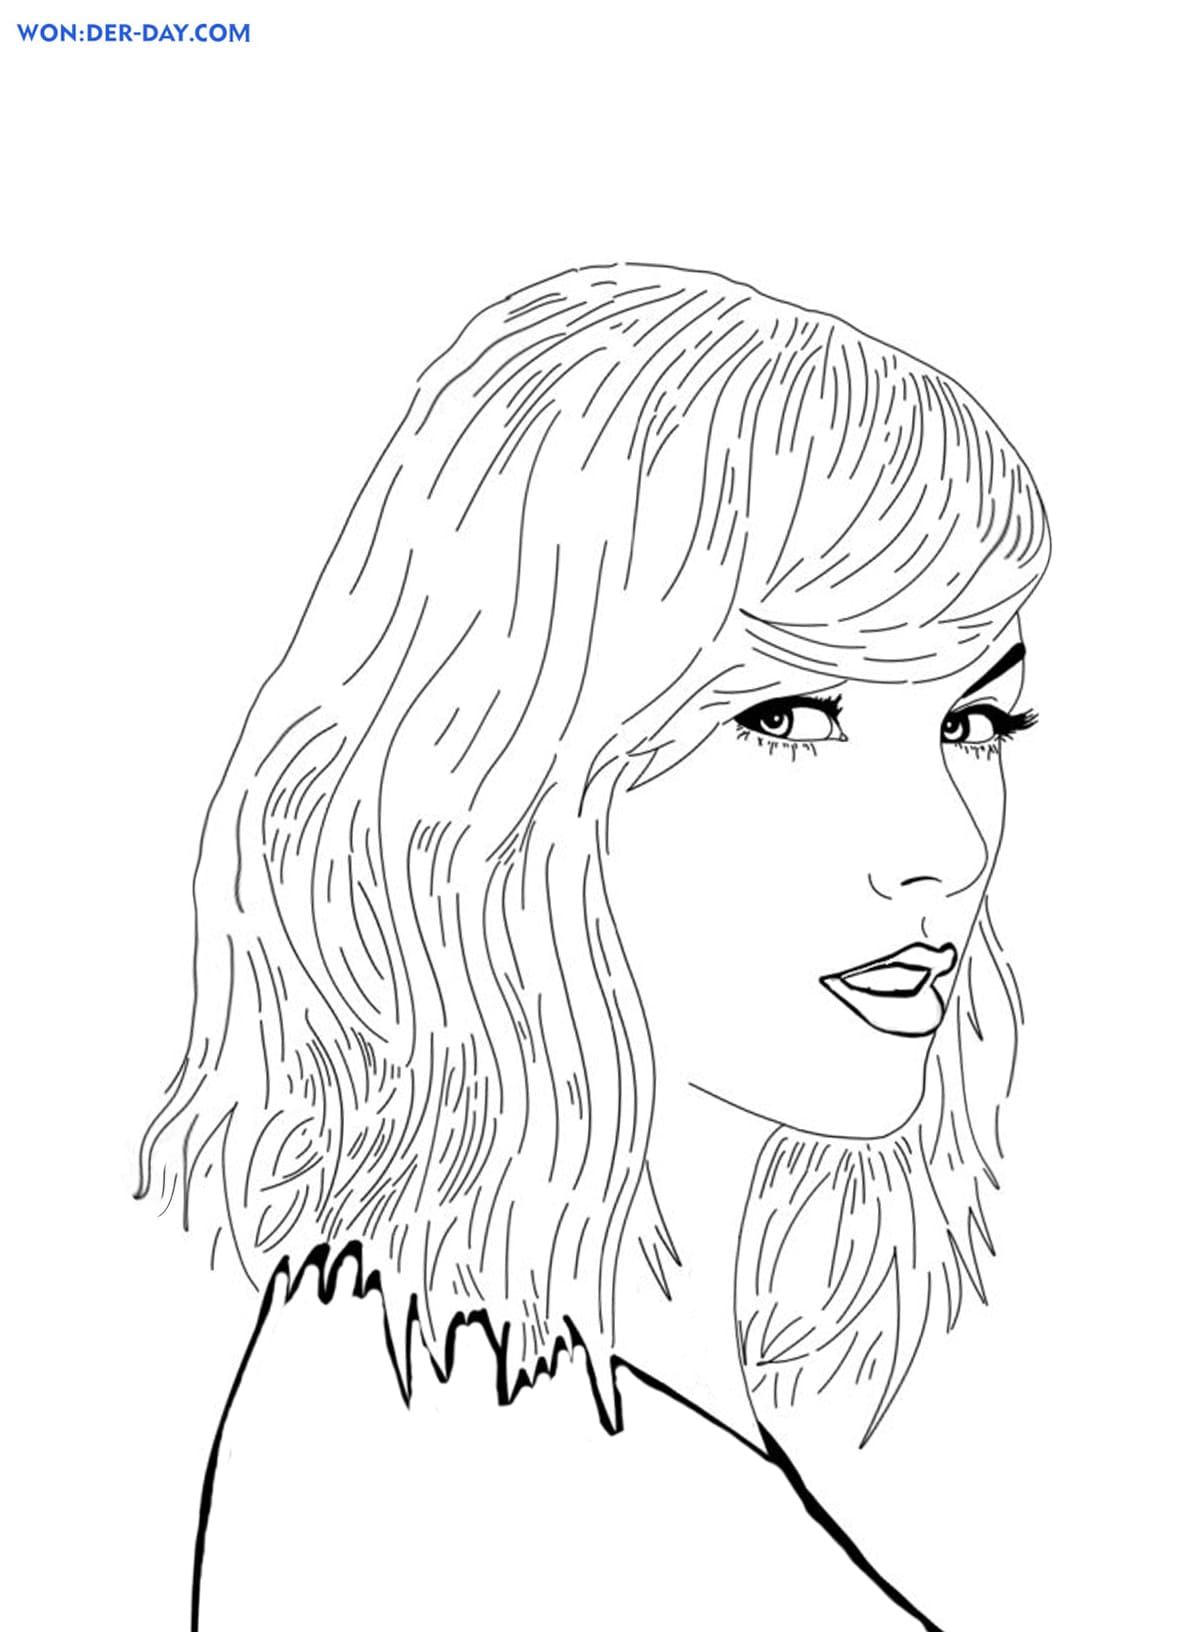 🖍️ 10+ Printable Taylor Swift Coloring Pages for Free 